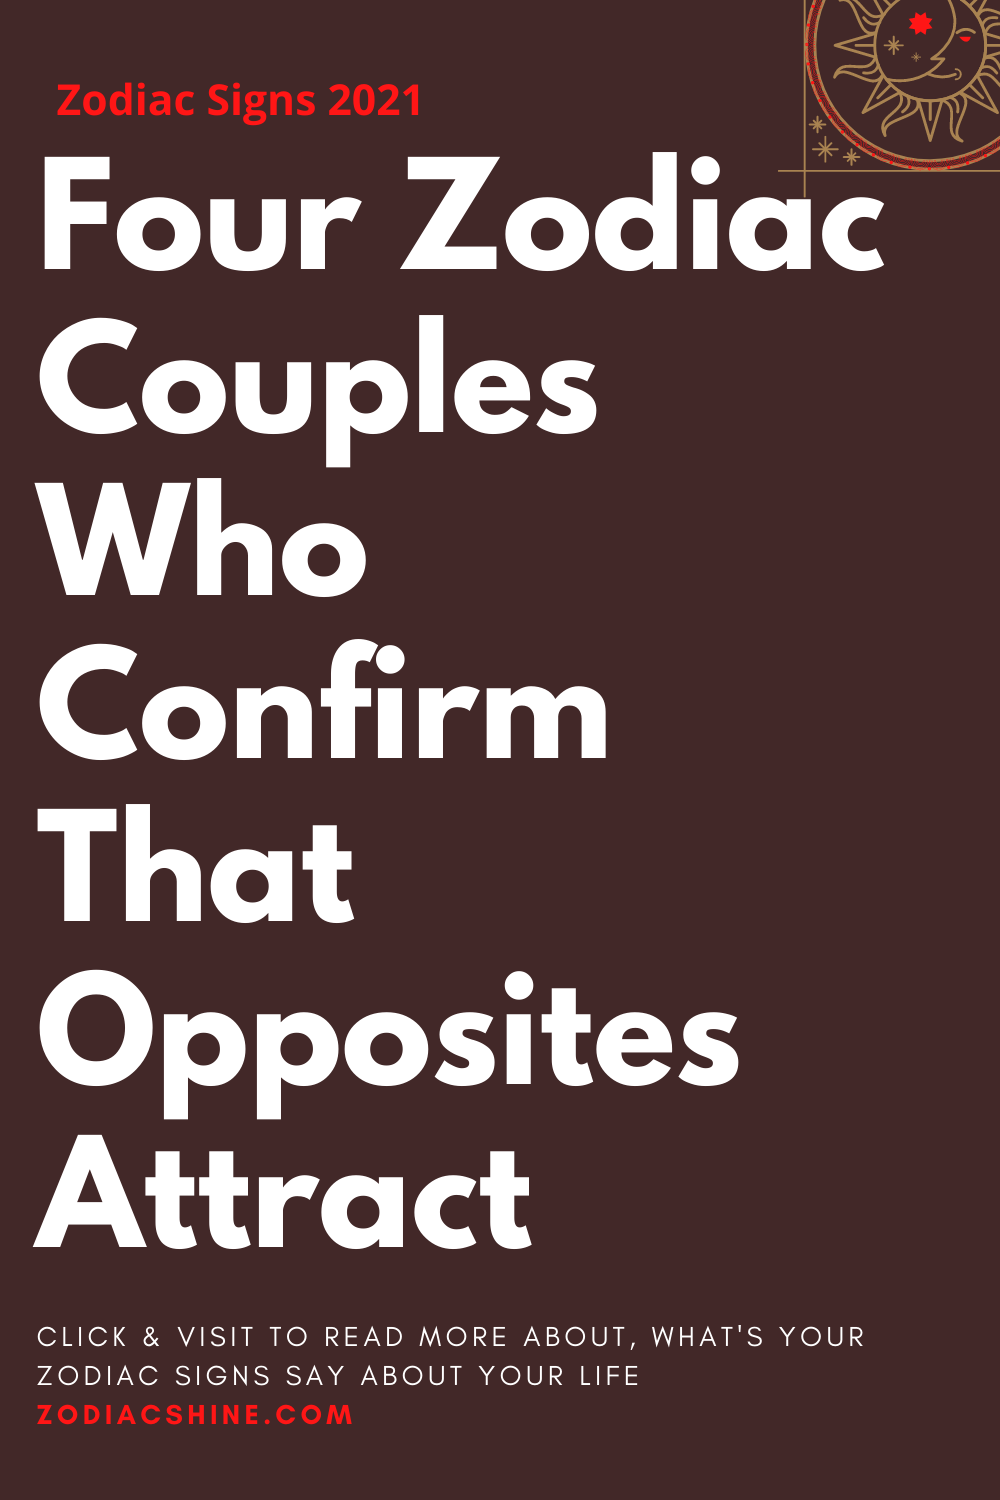 Four Zodiac Couples Who Confirm That Opposites Attract